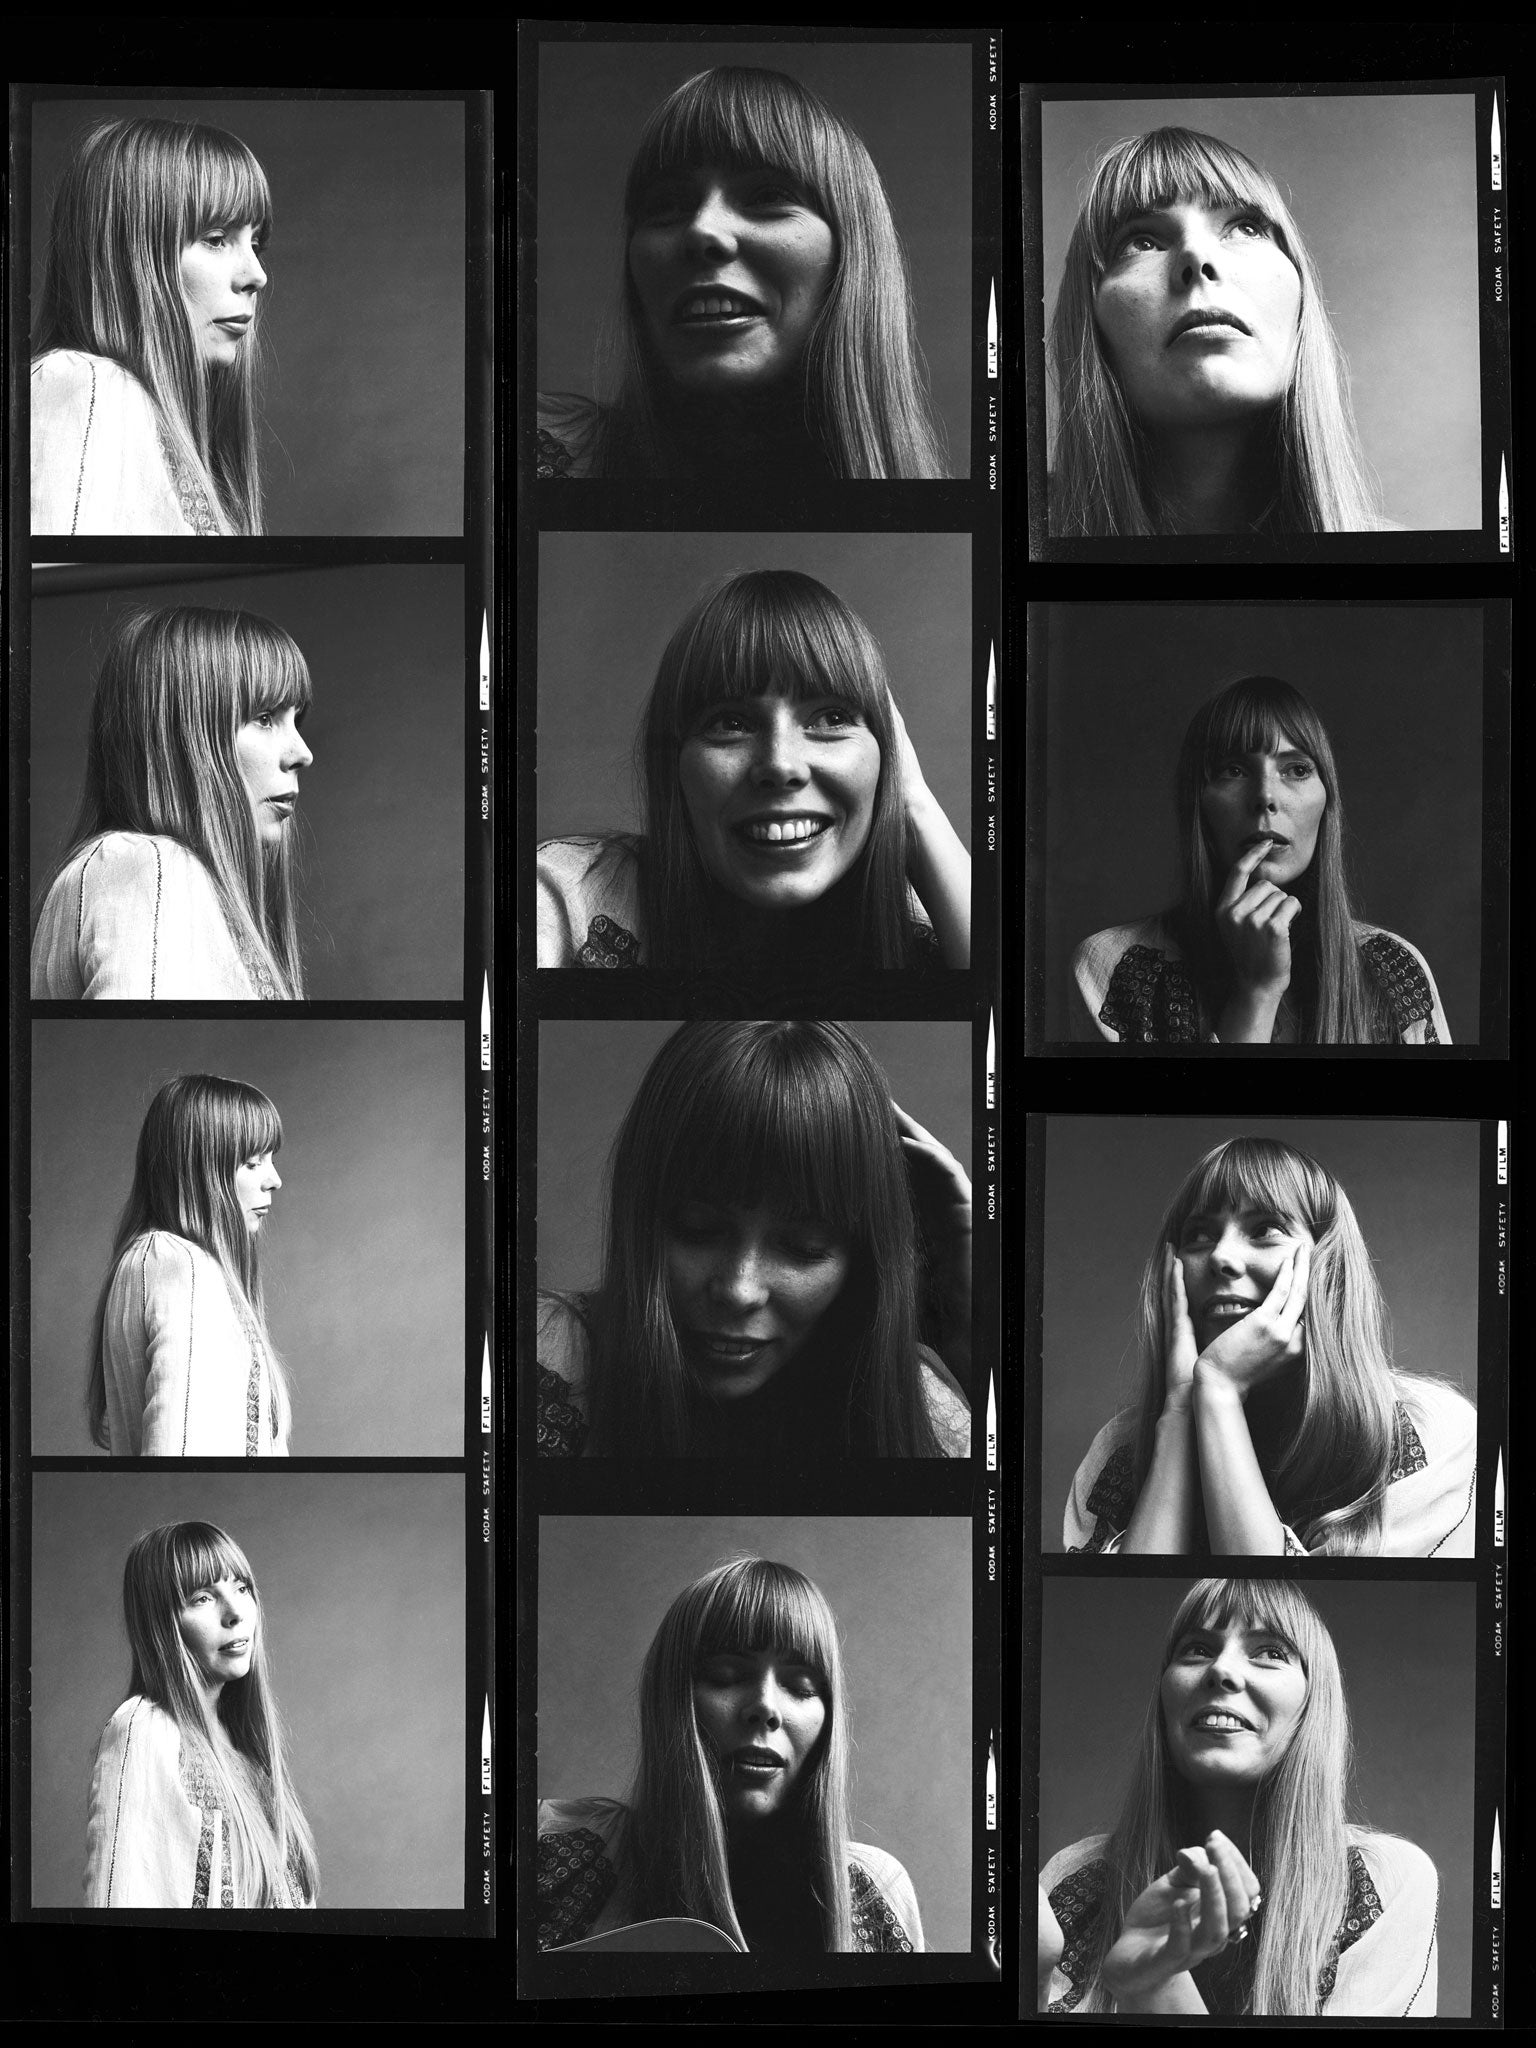 A contact sheet of photographs of Joni Mitchell from 1968, the year she released her first album